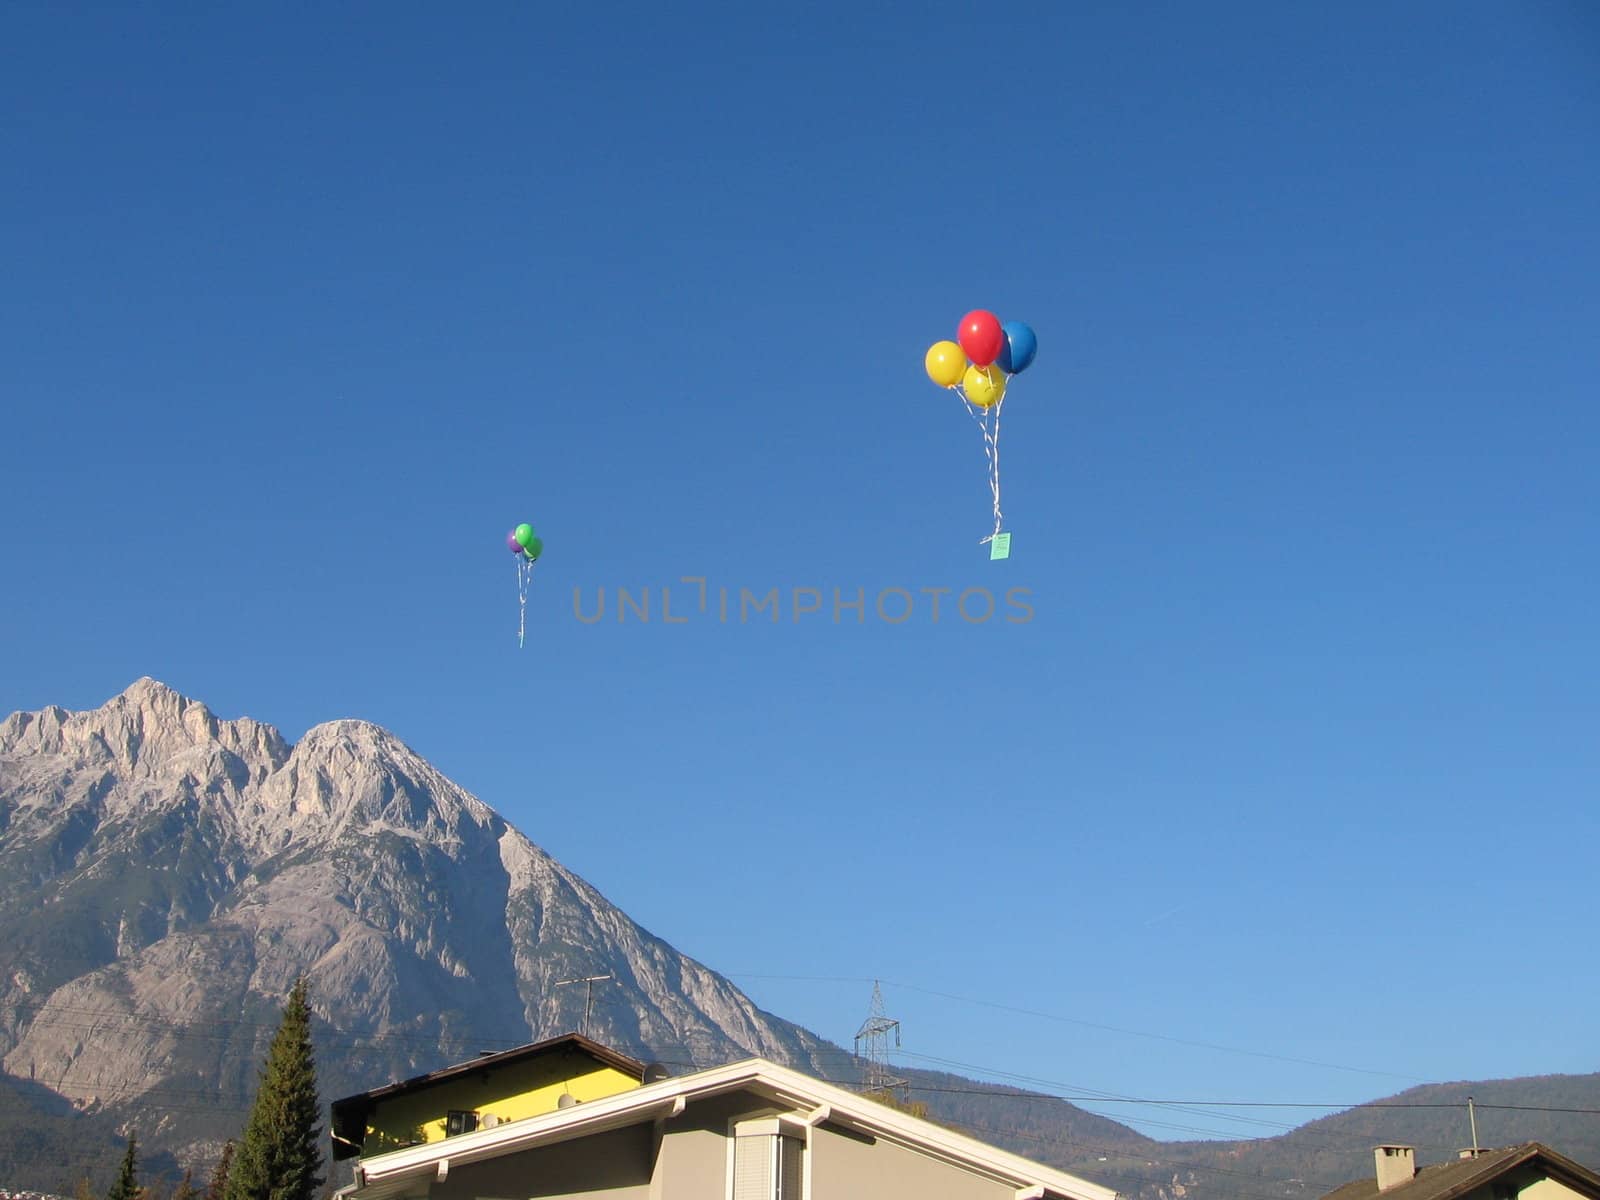 Balloon pull with a card over the sky by koep